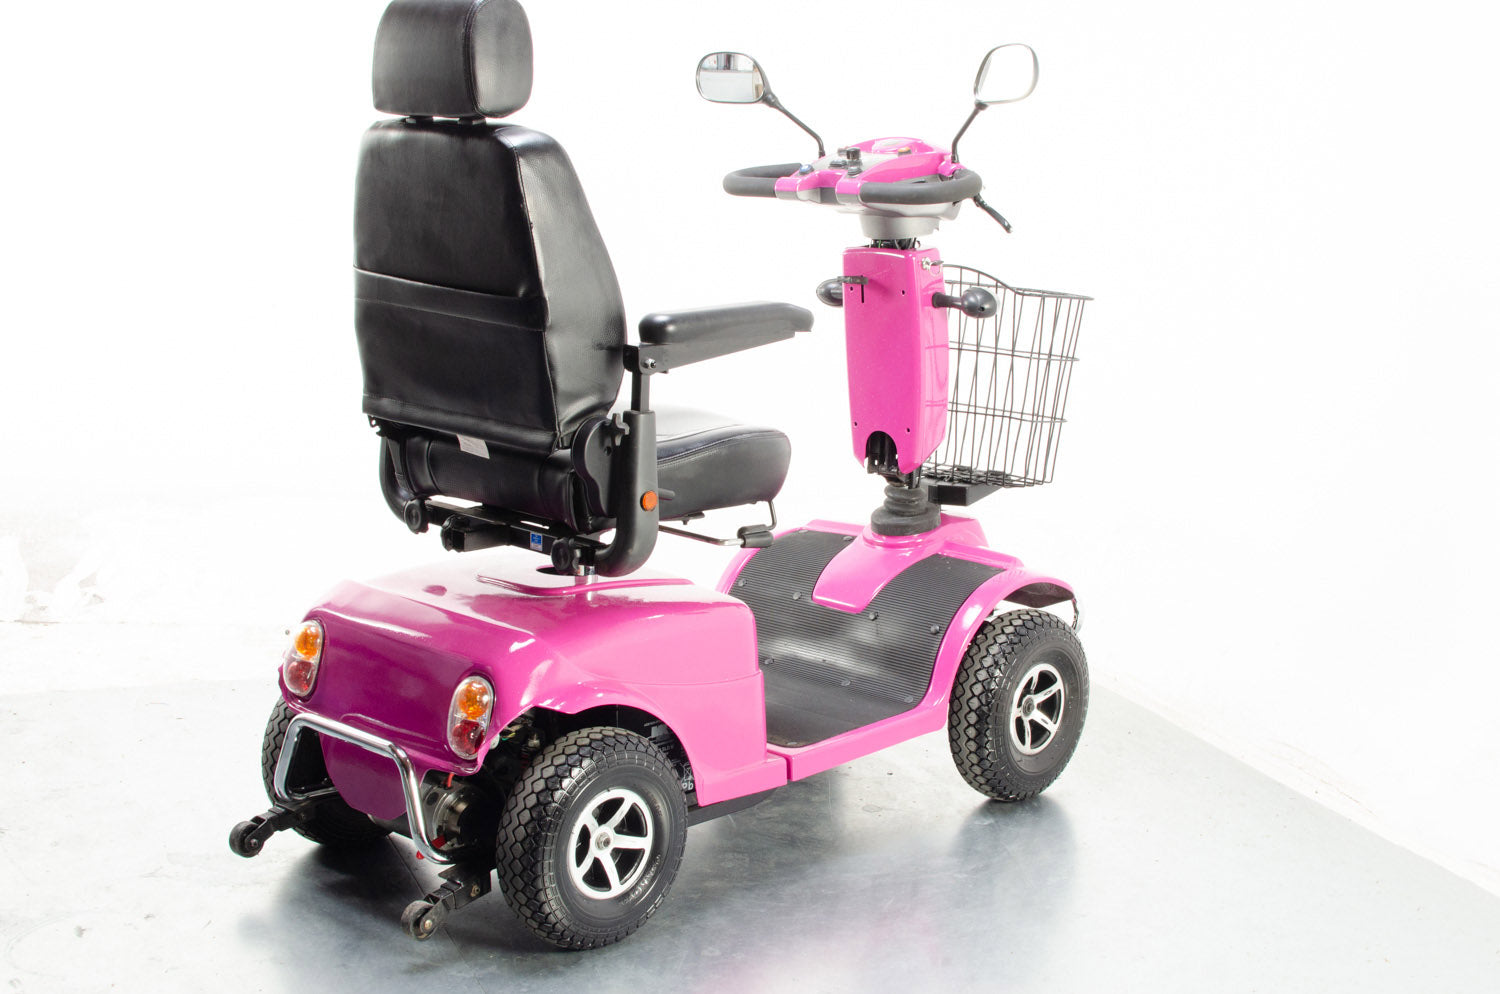 2016 Rascal Pioneer 8mph Large All Terrain Mobility Scooter in Pink